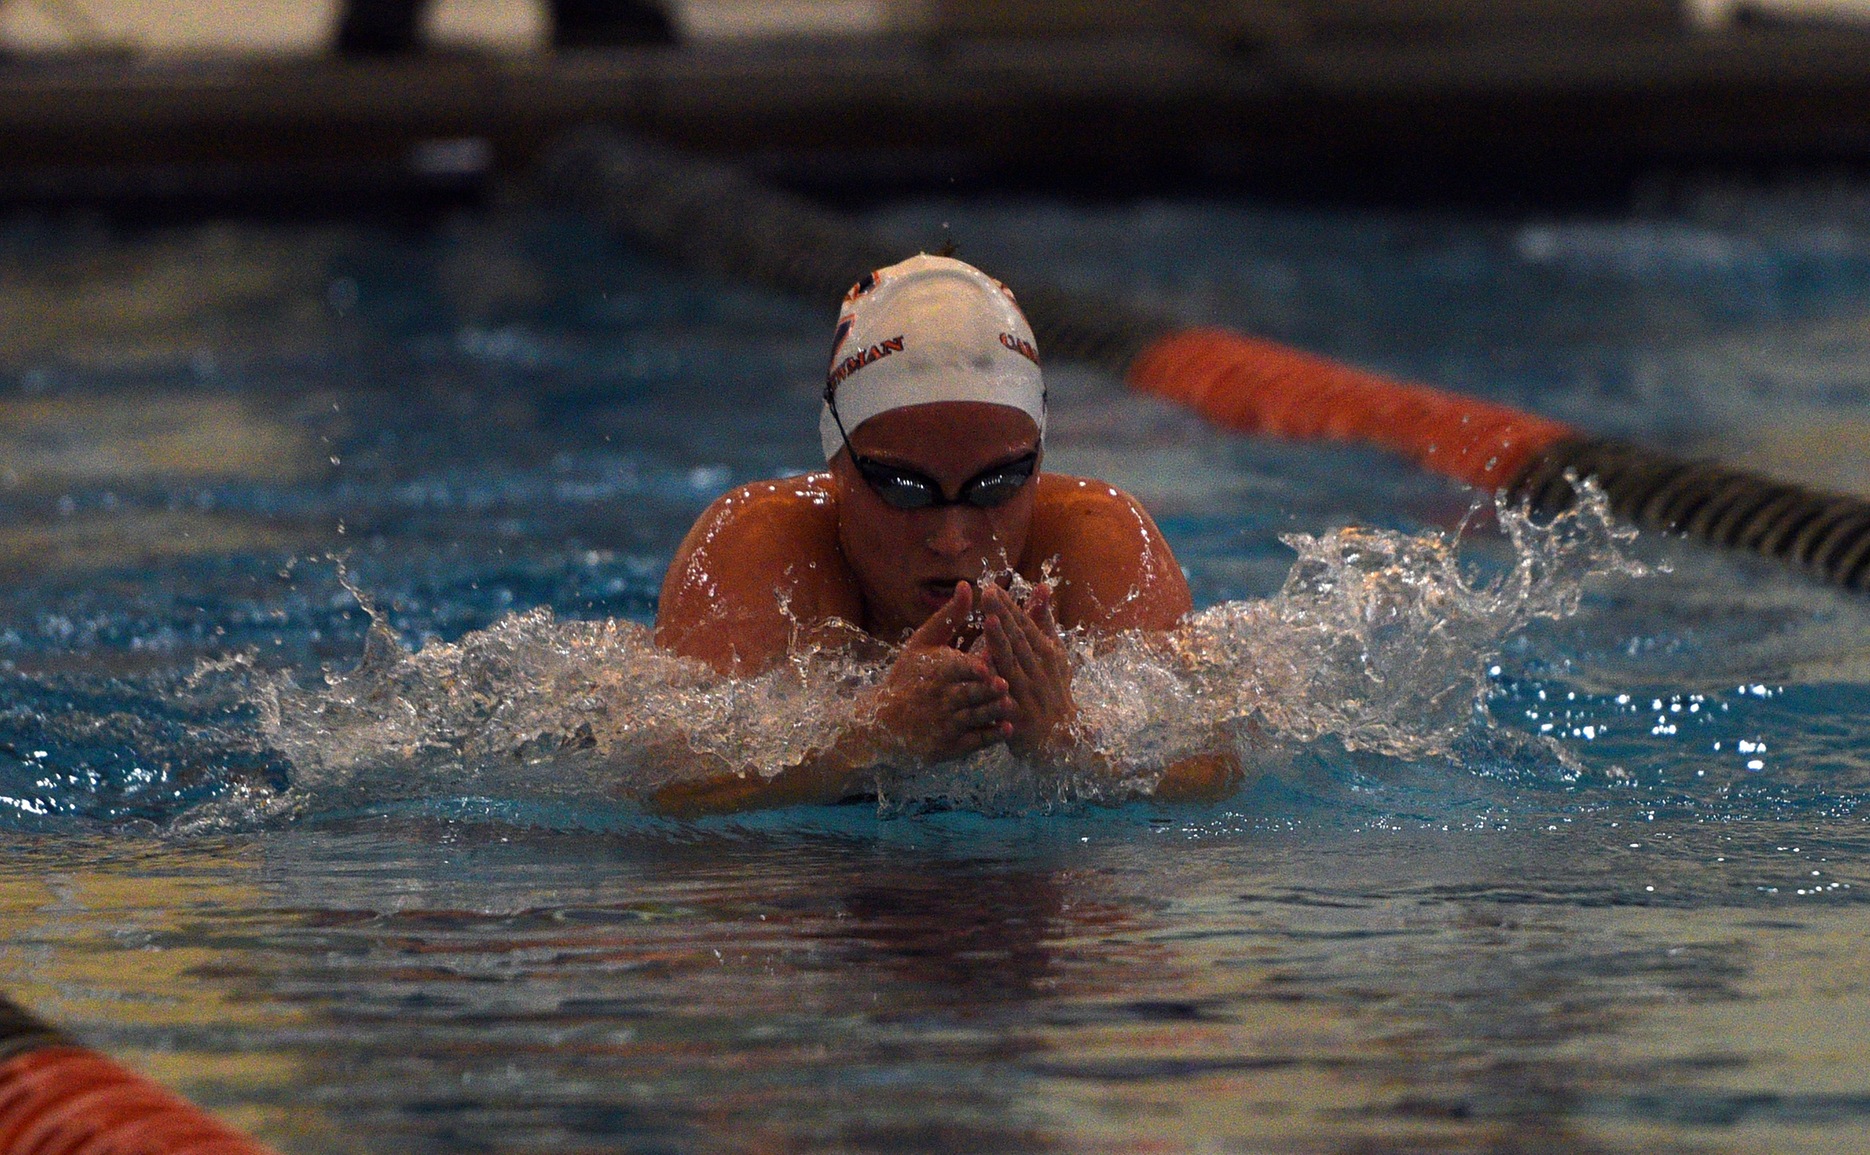 Blue team takes the series lead (4-3) after Carson-Newman swim's annual Blue v. Orange World Championships